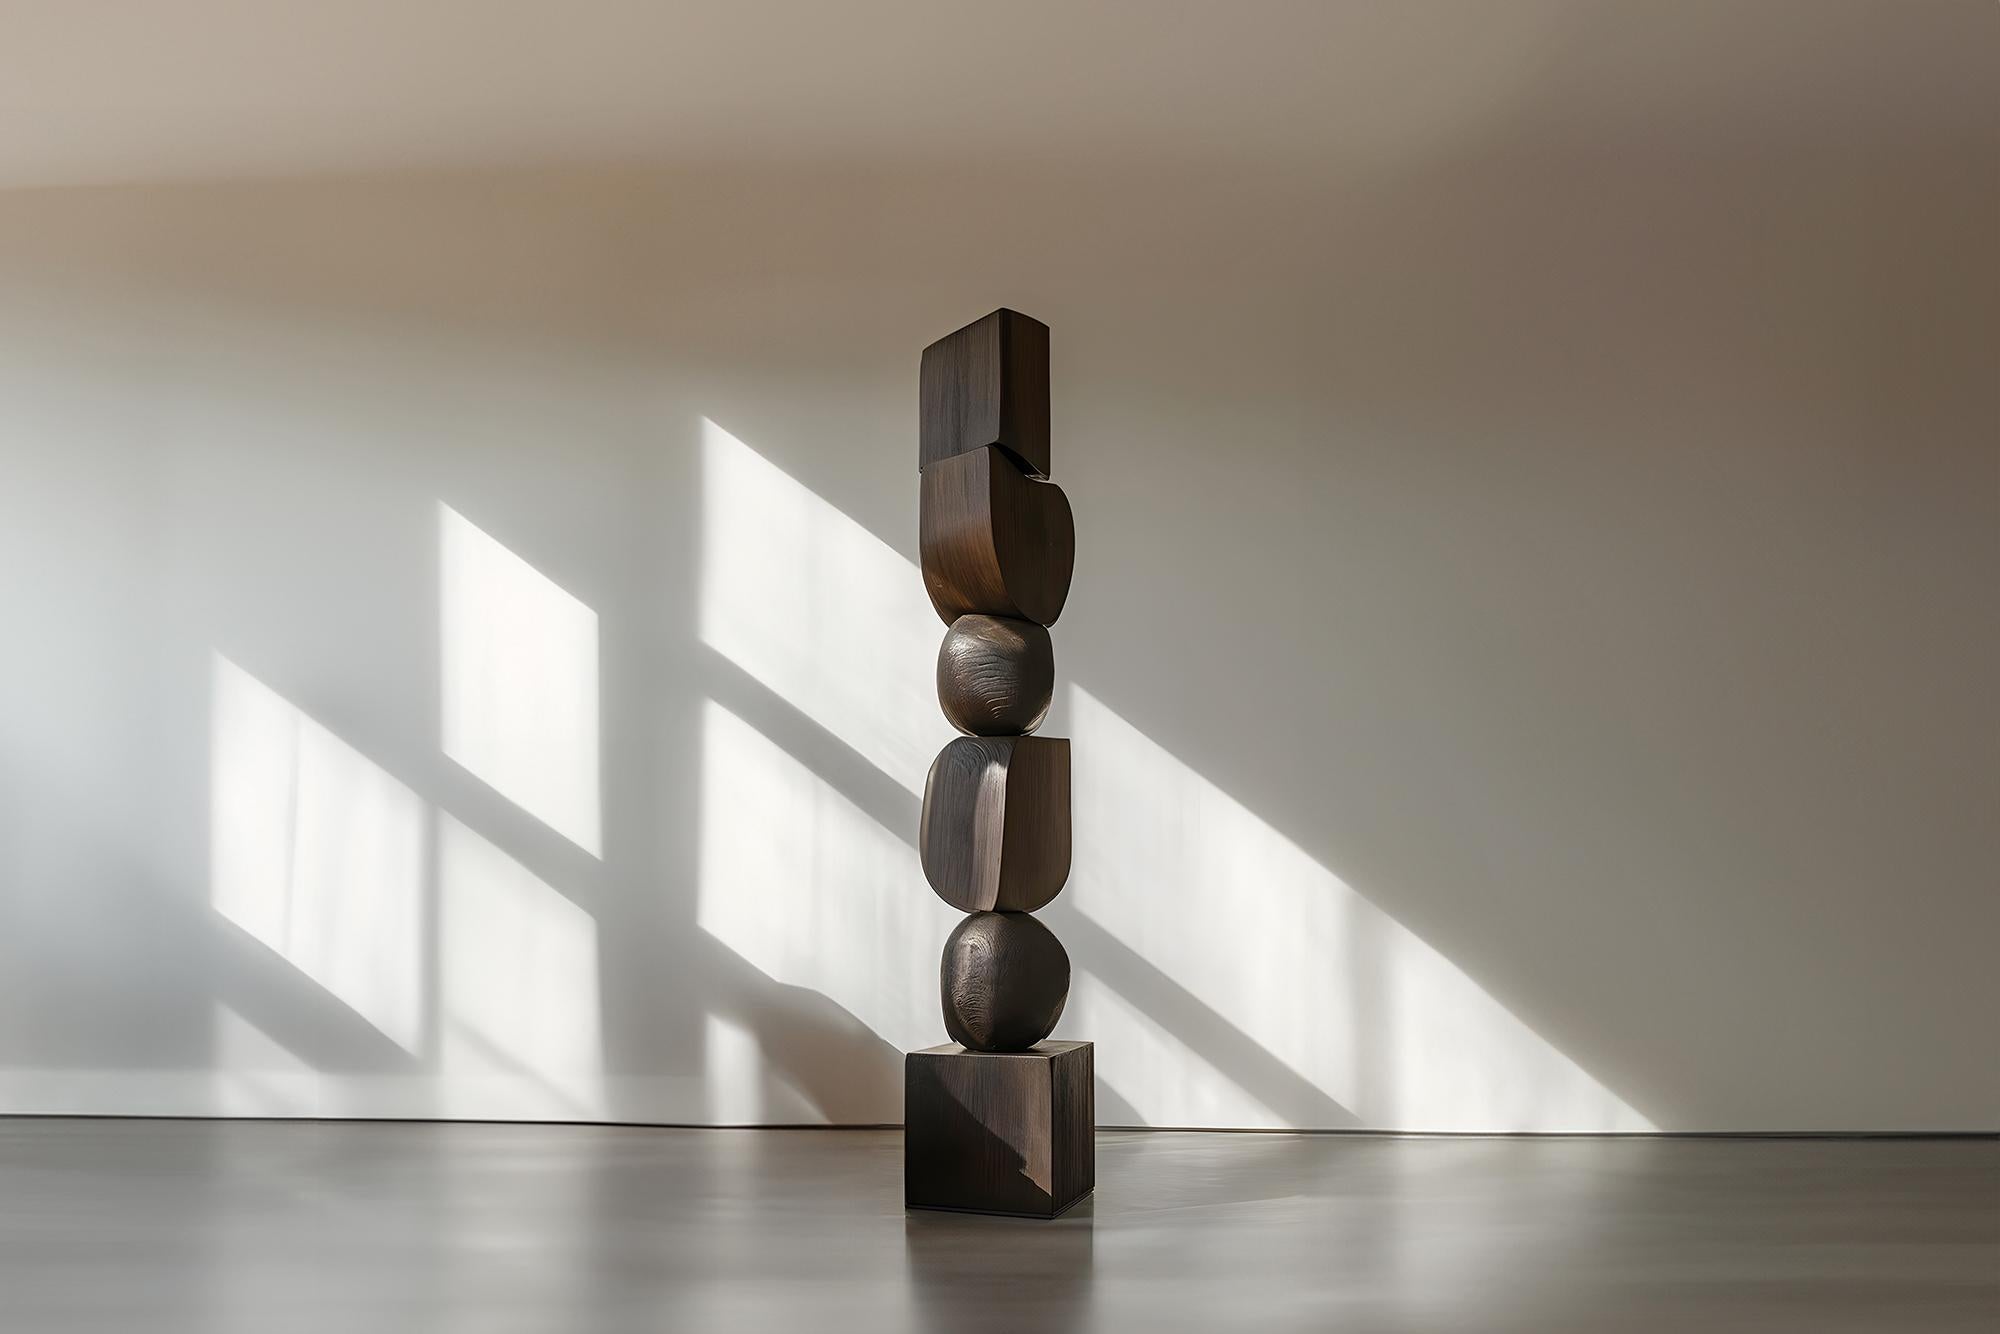 A Dark, Elegant Design Materializes in Burned Oak, Still Stand No91, by NONO
——


Joel Escalona's wooden standing sculptures are objects of raw beauty and serene grace. Each one is a testament to the power of the material, with smooth curves that